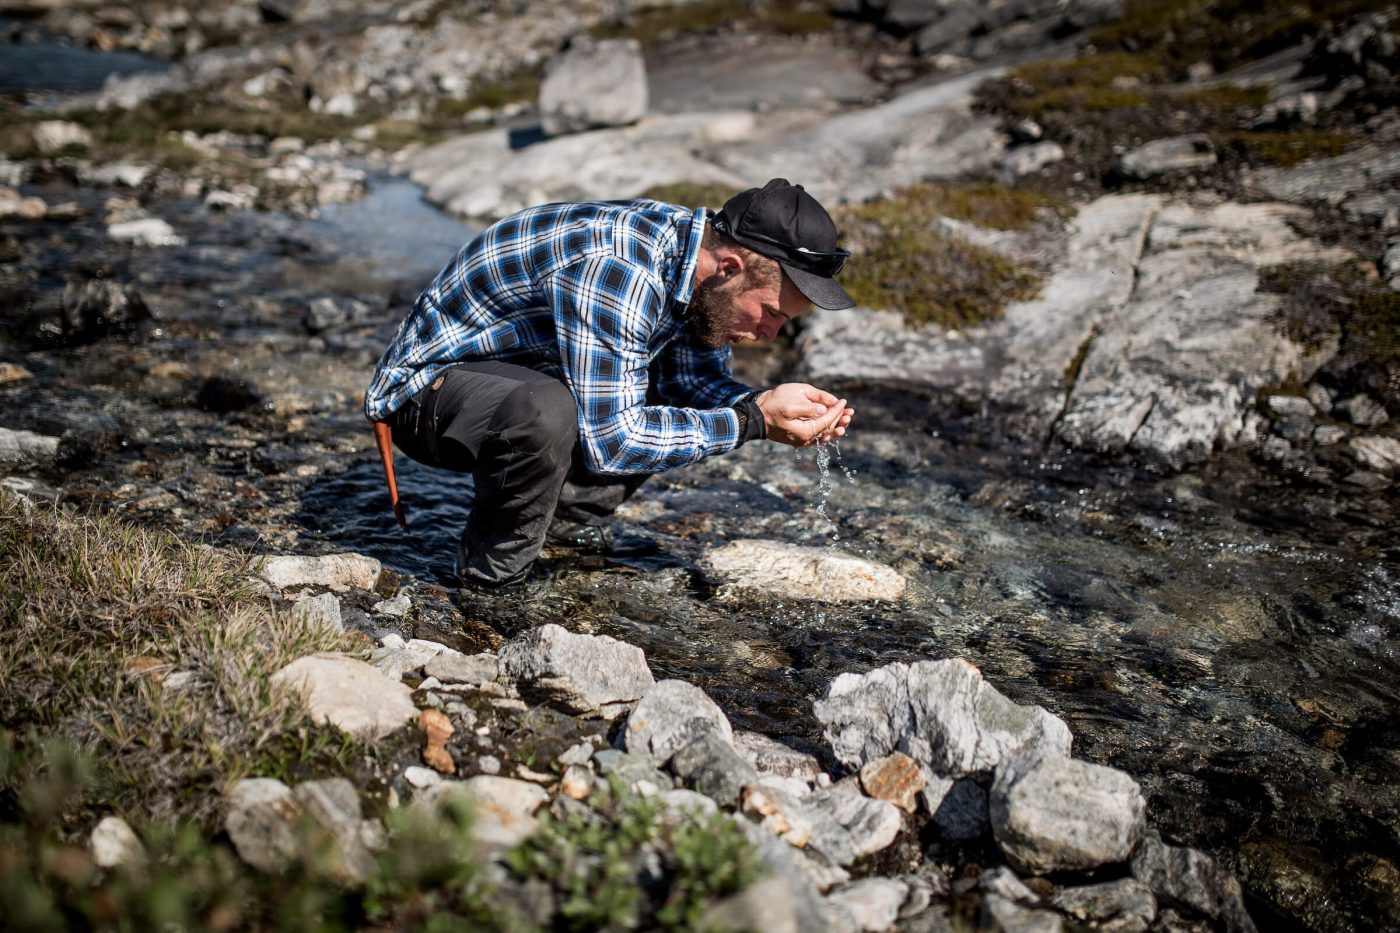 A hiker in East Greenland drinking pure, fresh water from a stream. Photo by Mads Pihl